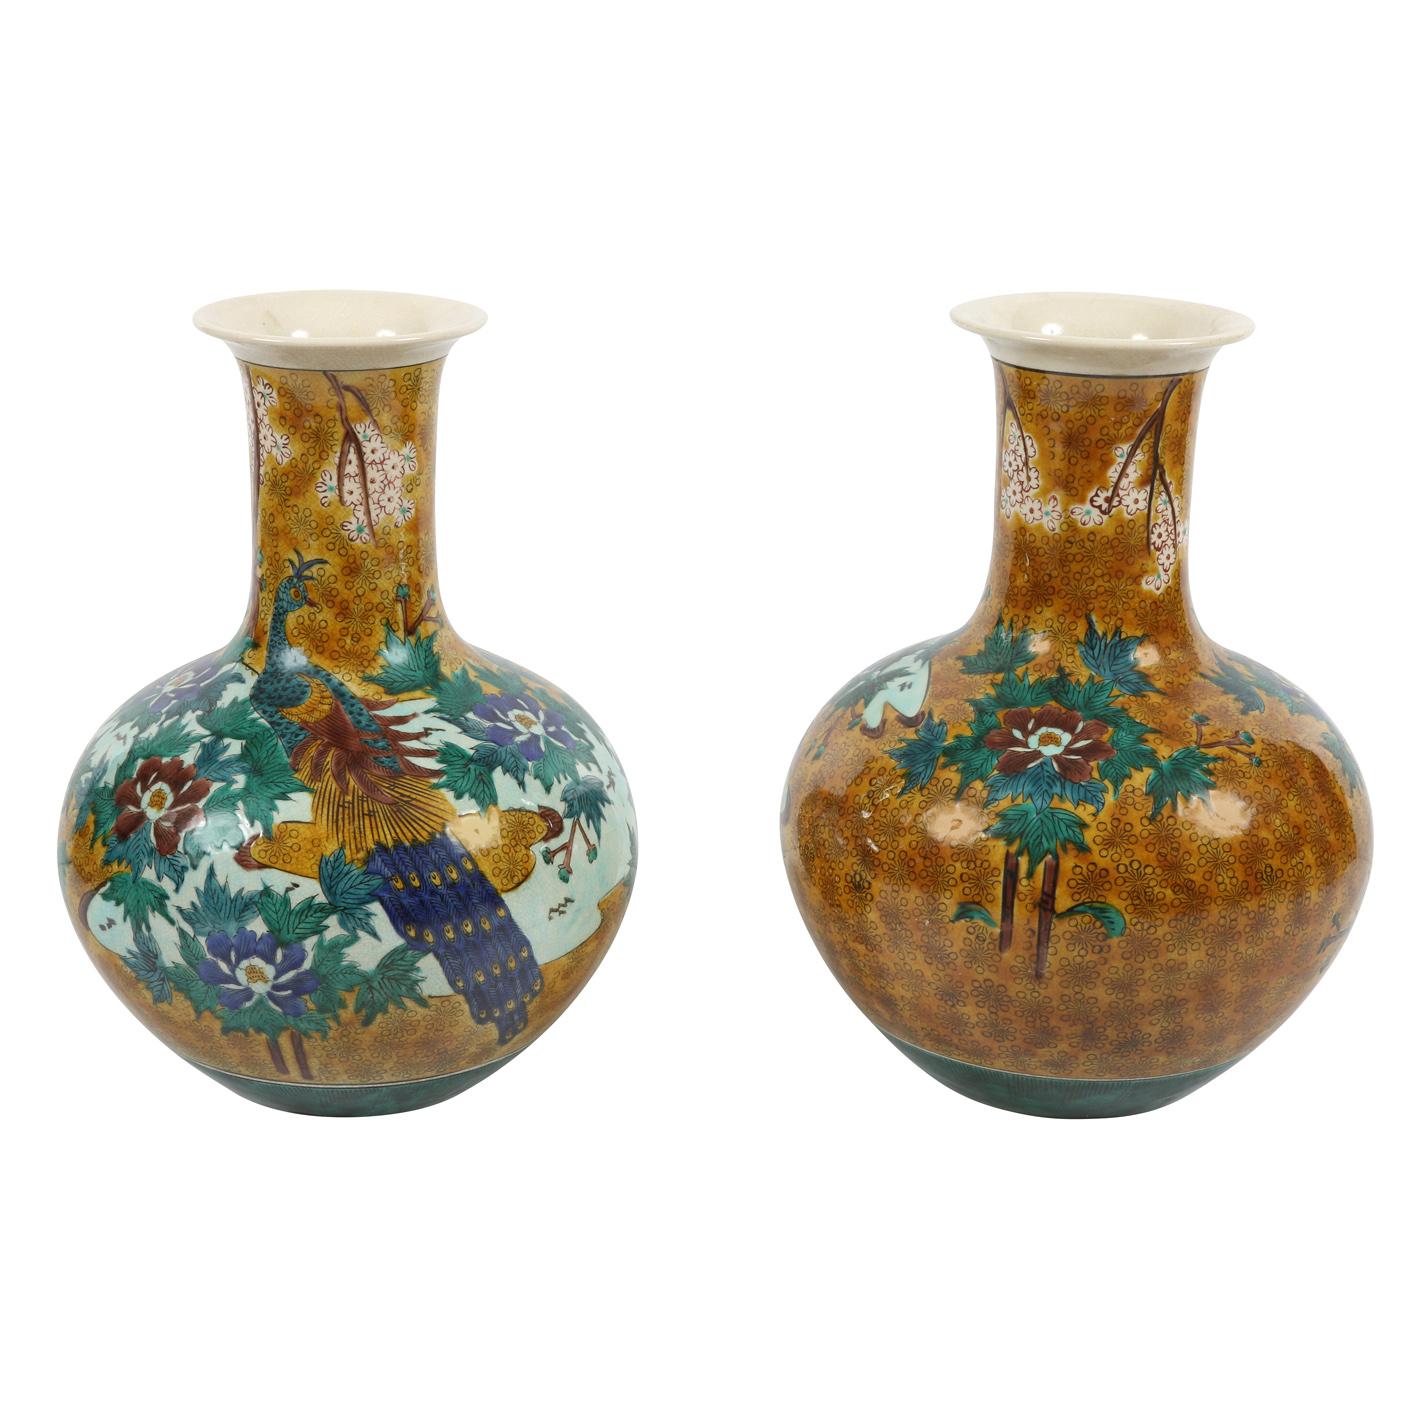 20th Century Pair of Ochre, Green and Blue Chinese Vases